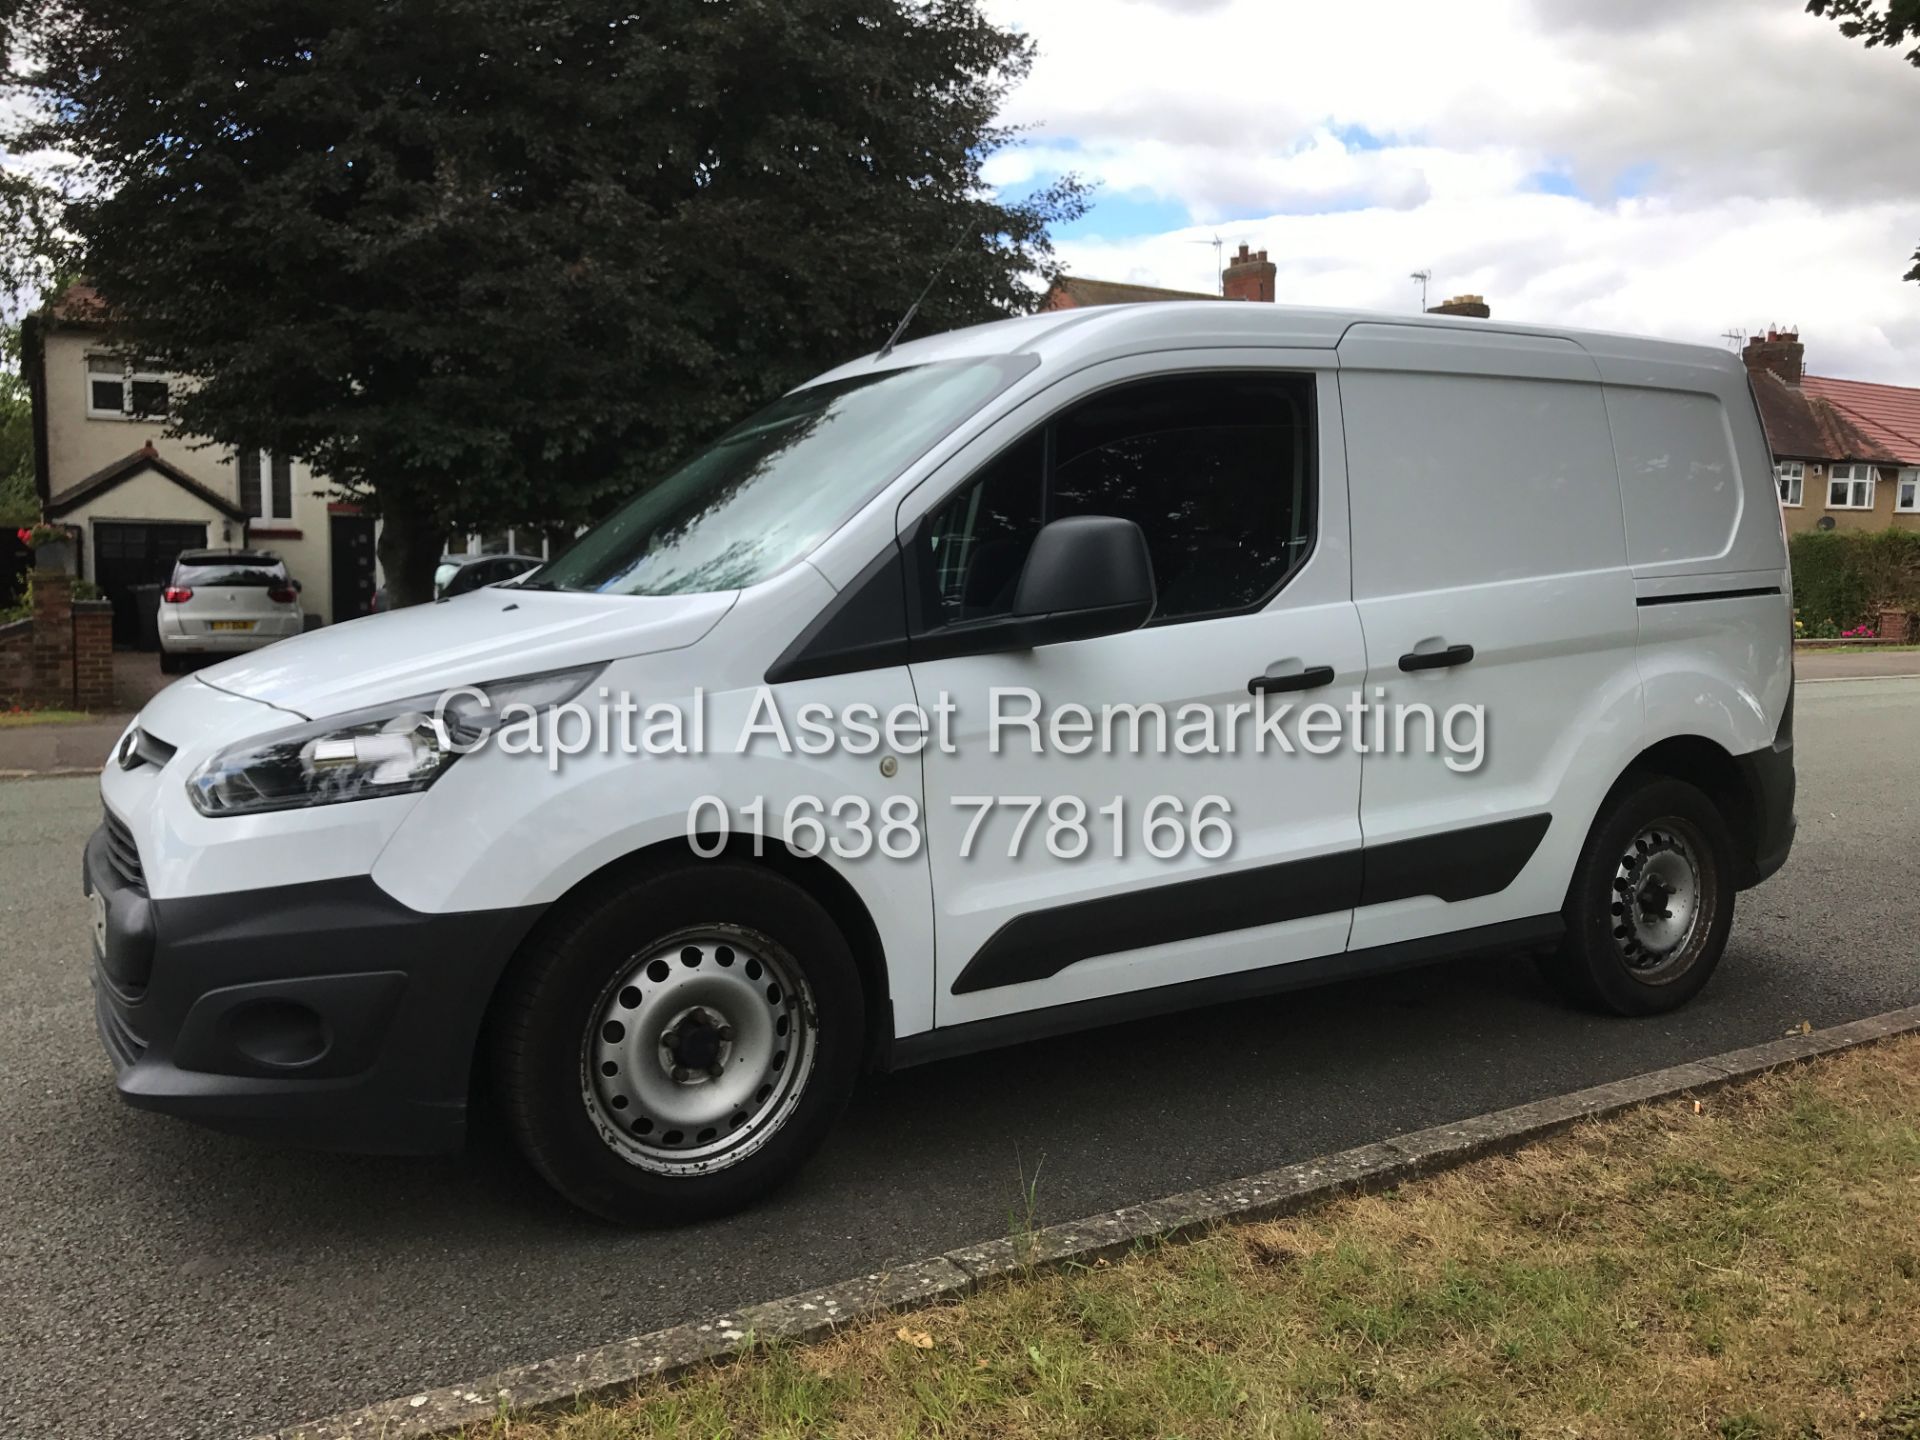 (ON SALE) FORD TRANSIT CONNECT 1.6TDCI L1 "200" 1 OWNER (14 REG - NEW SHAPE) ONLY 76K MILES - SLD